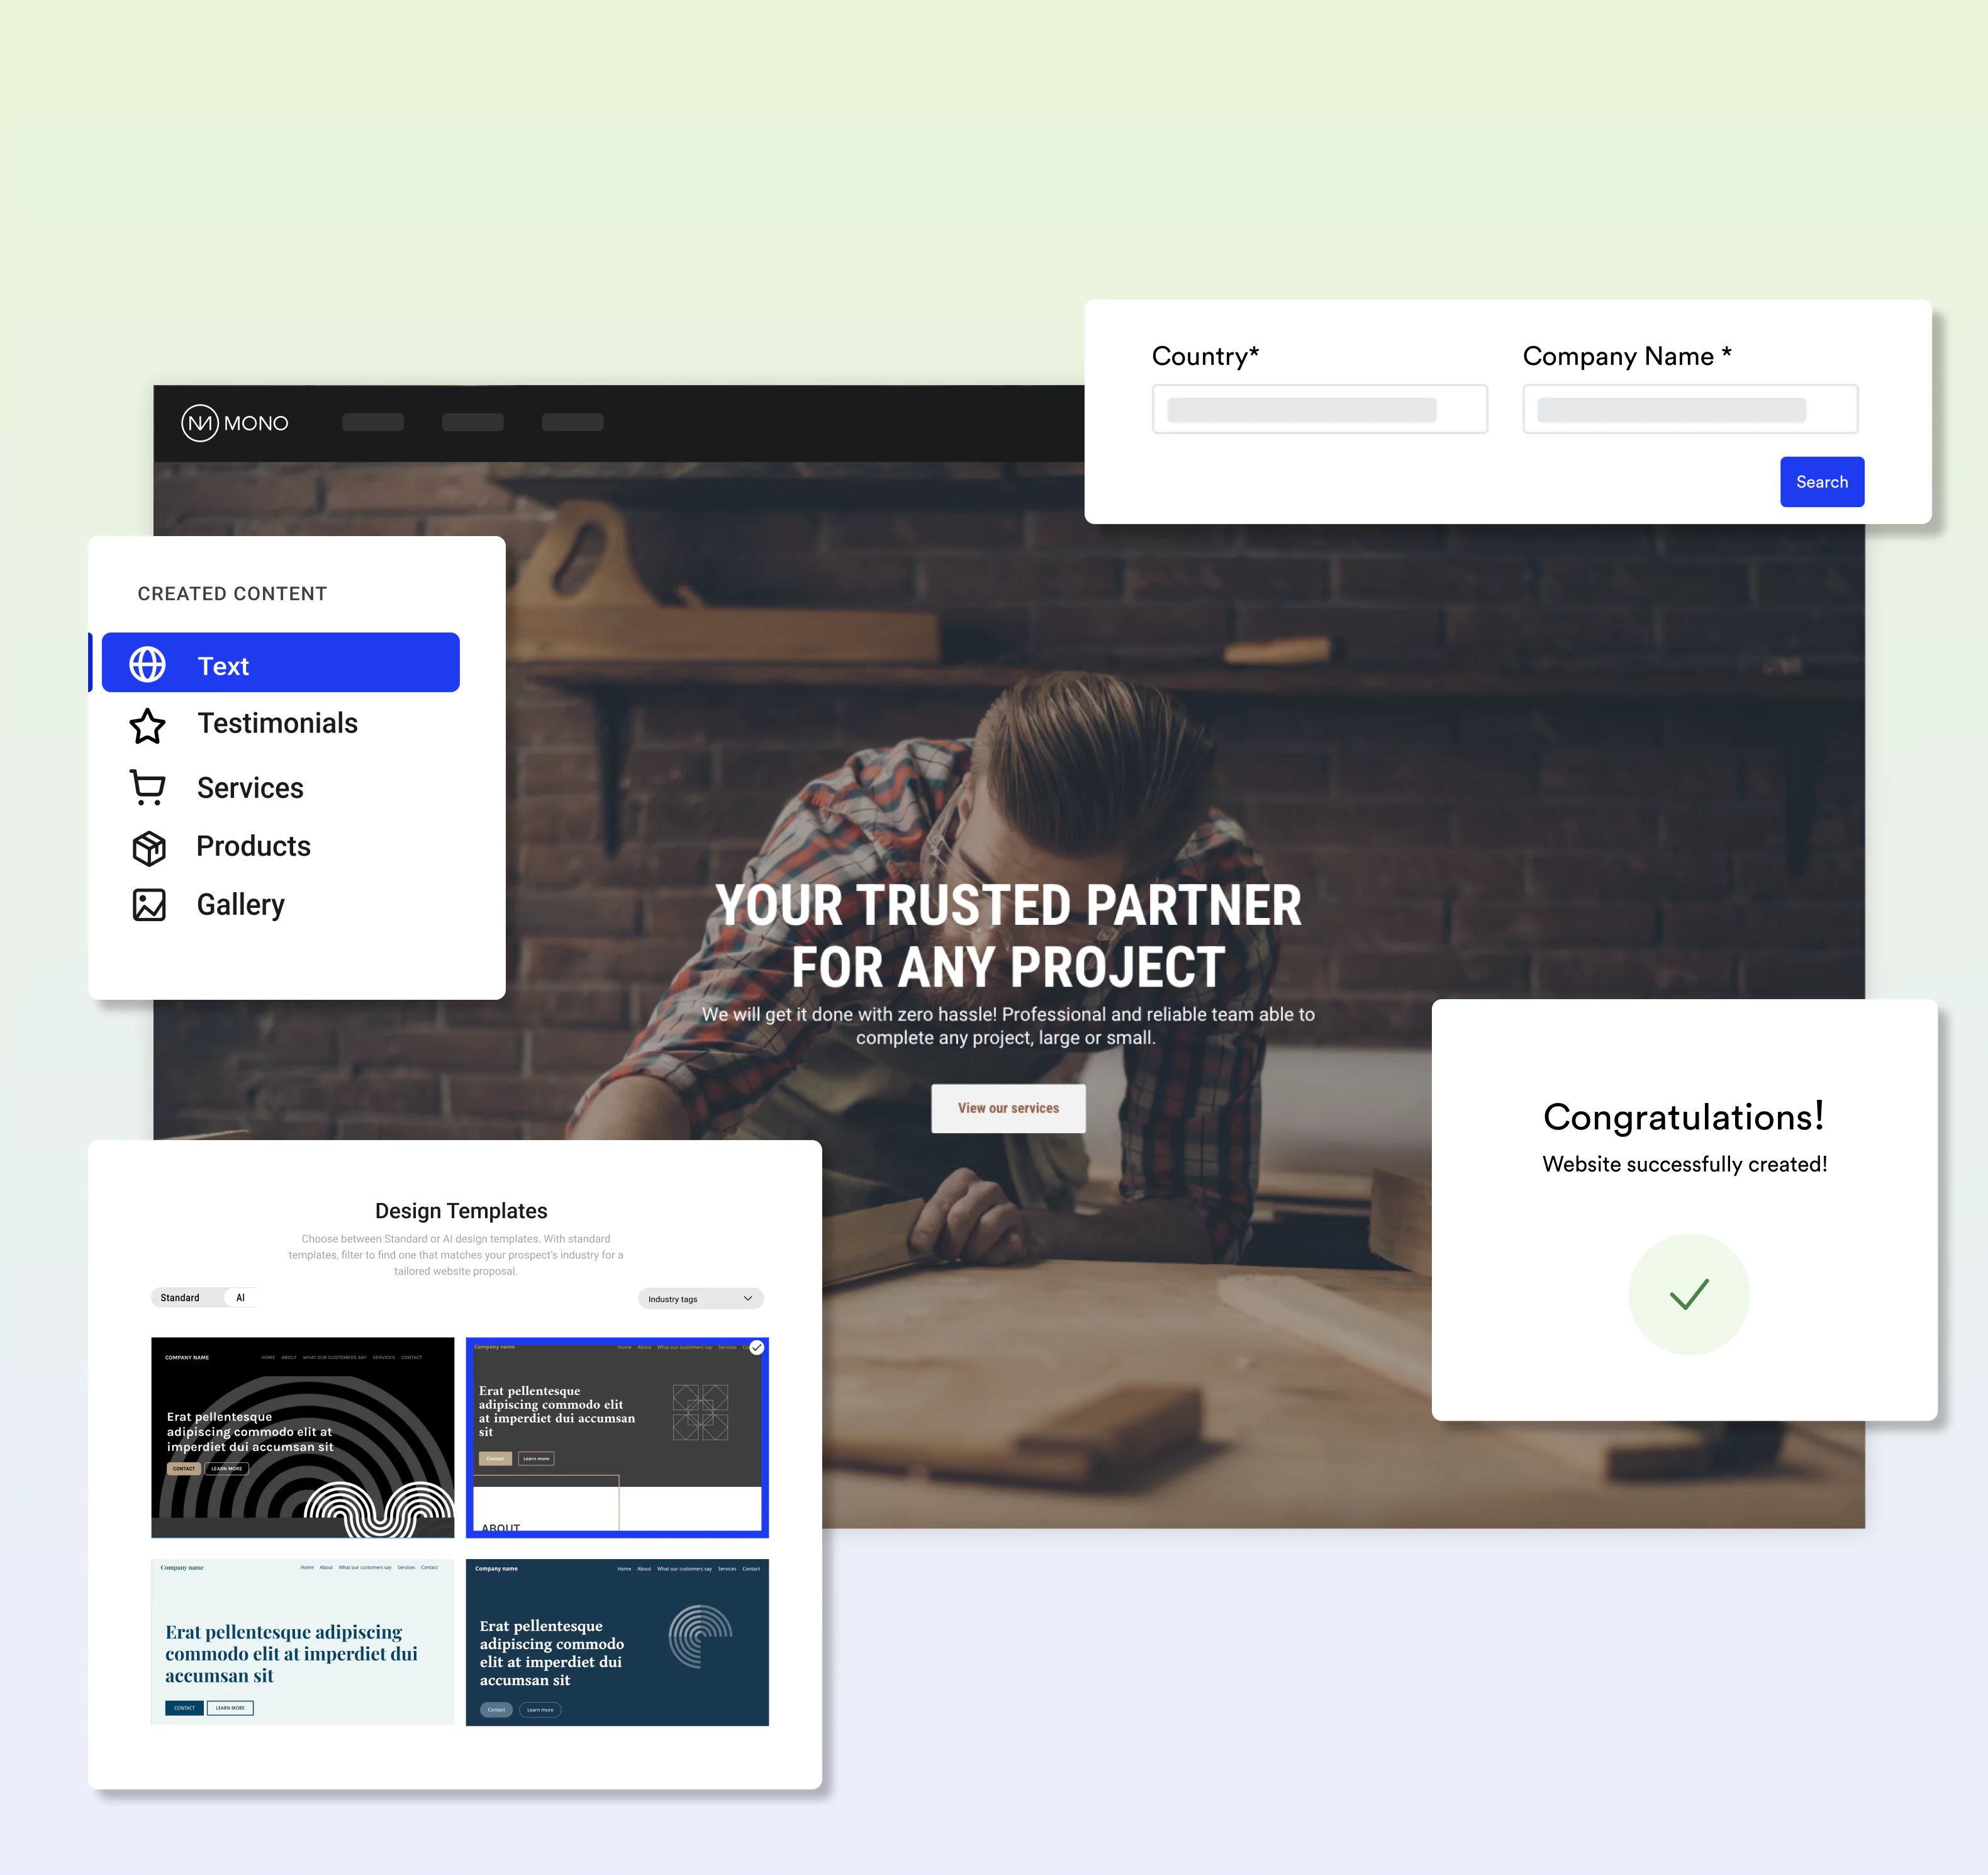 Mono - Your Trusted Partner For Any Project - Shows the main steps of the Quick Creator AI flow: Search with public business details, template selection, AI content creation and created site.